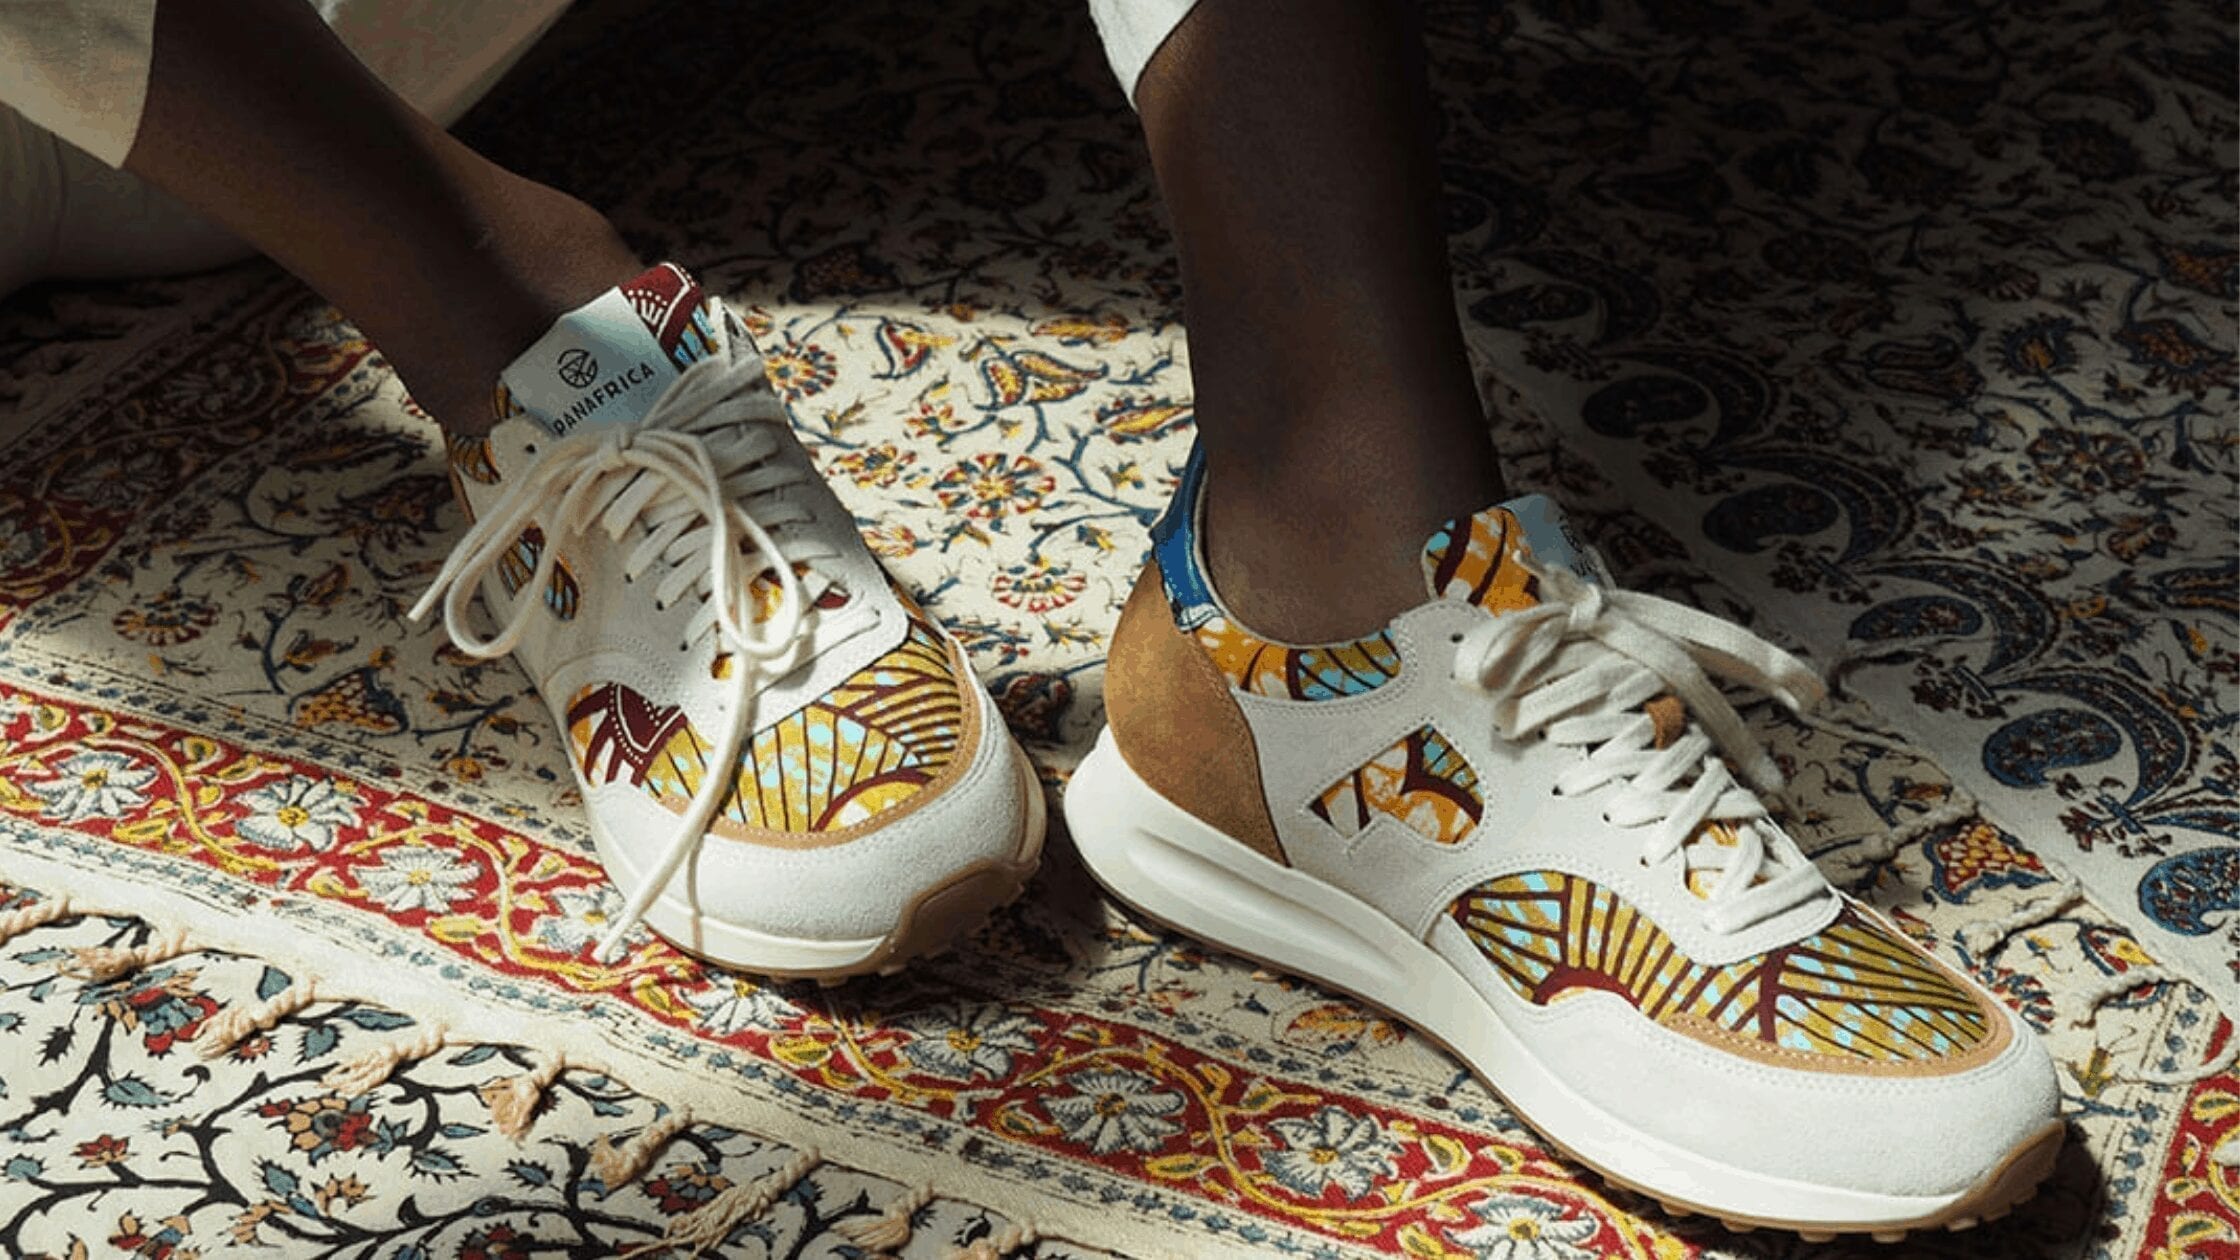 Meet PANAFRICA, the Sneaker Company Investing in Education and Job Training Across Africa